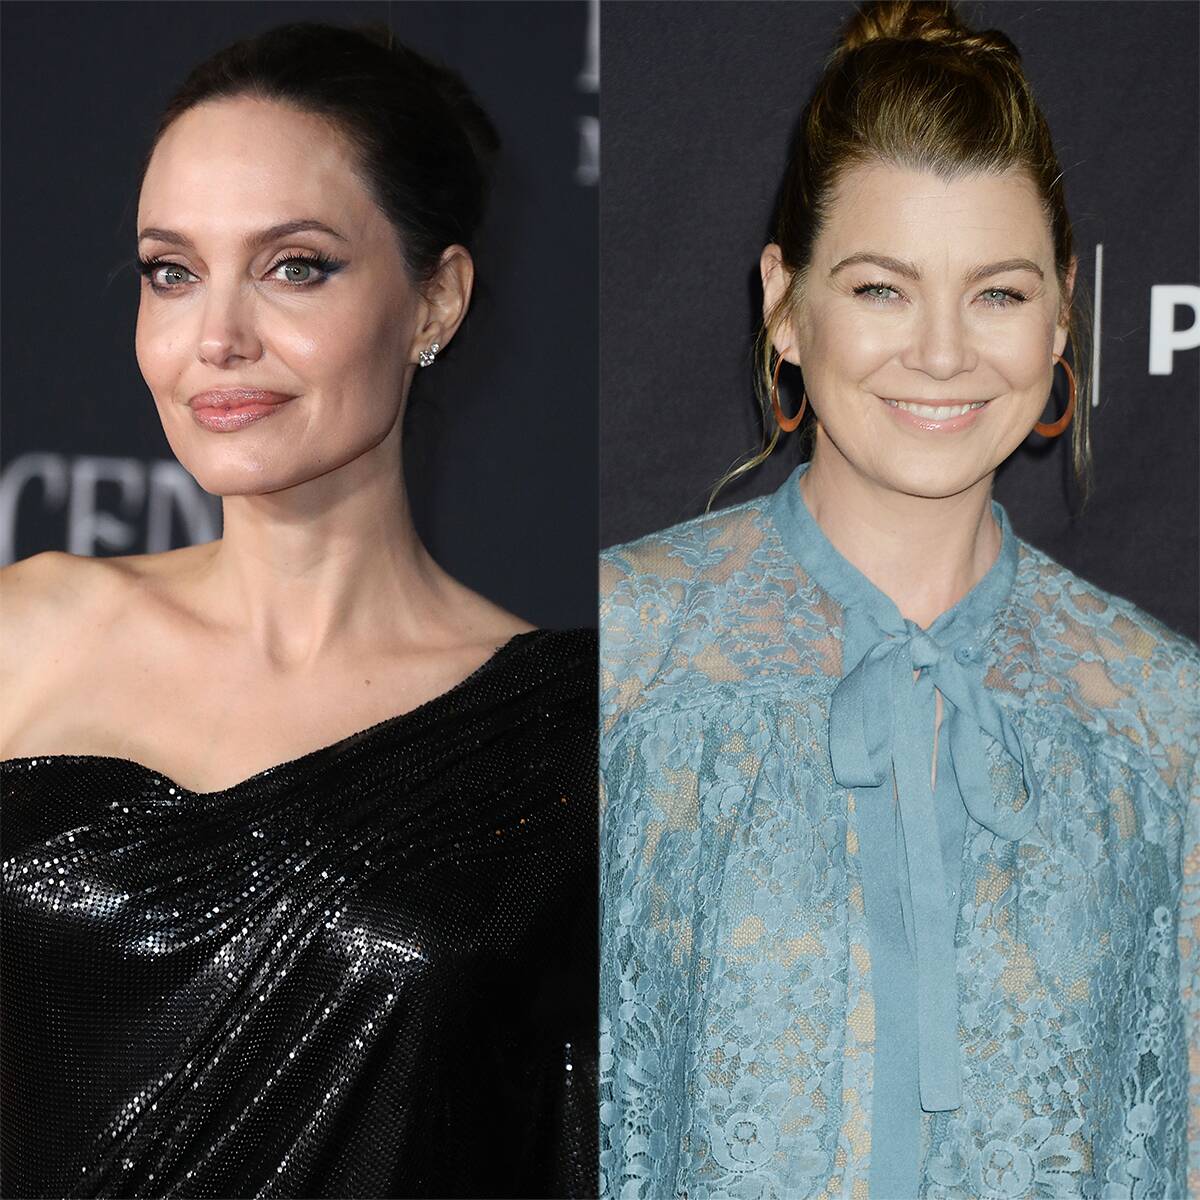 Angelina Jolie and Ellen Pompeo Are the Surprise Celeb BFFs We Never Knew We Needed